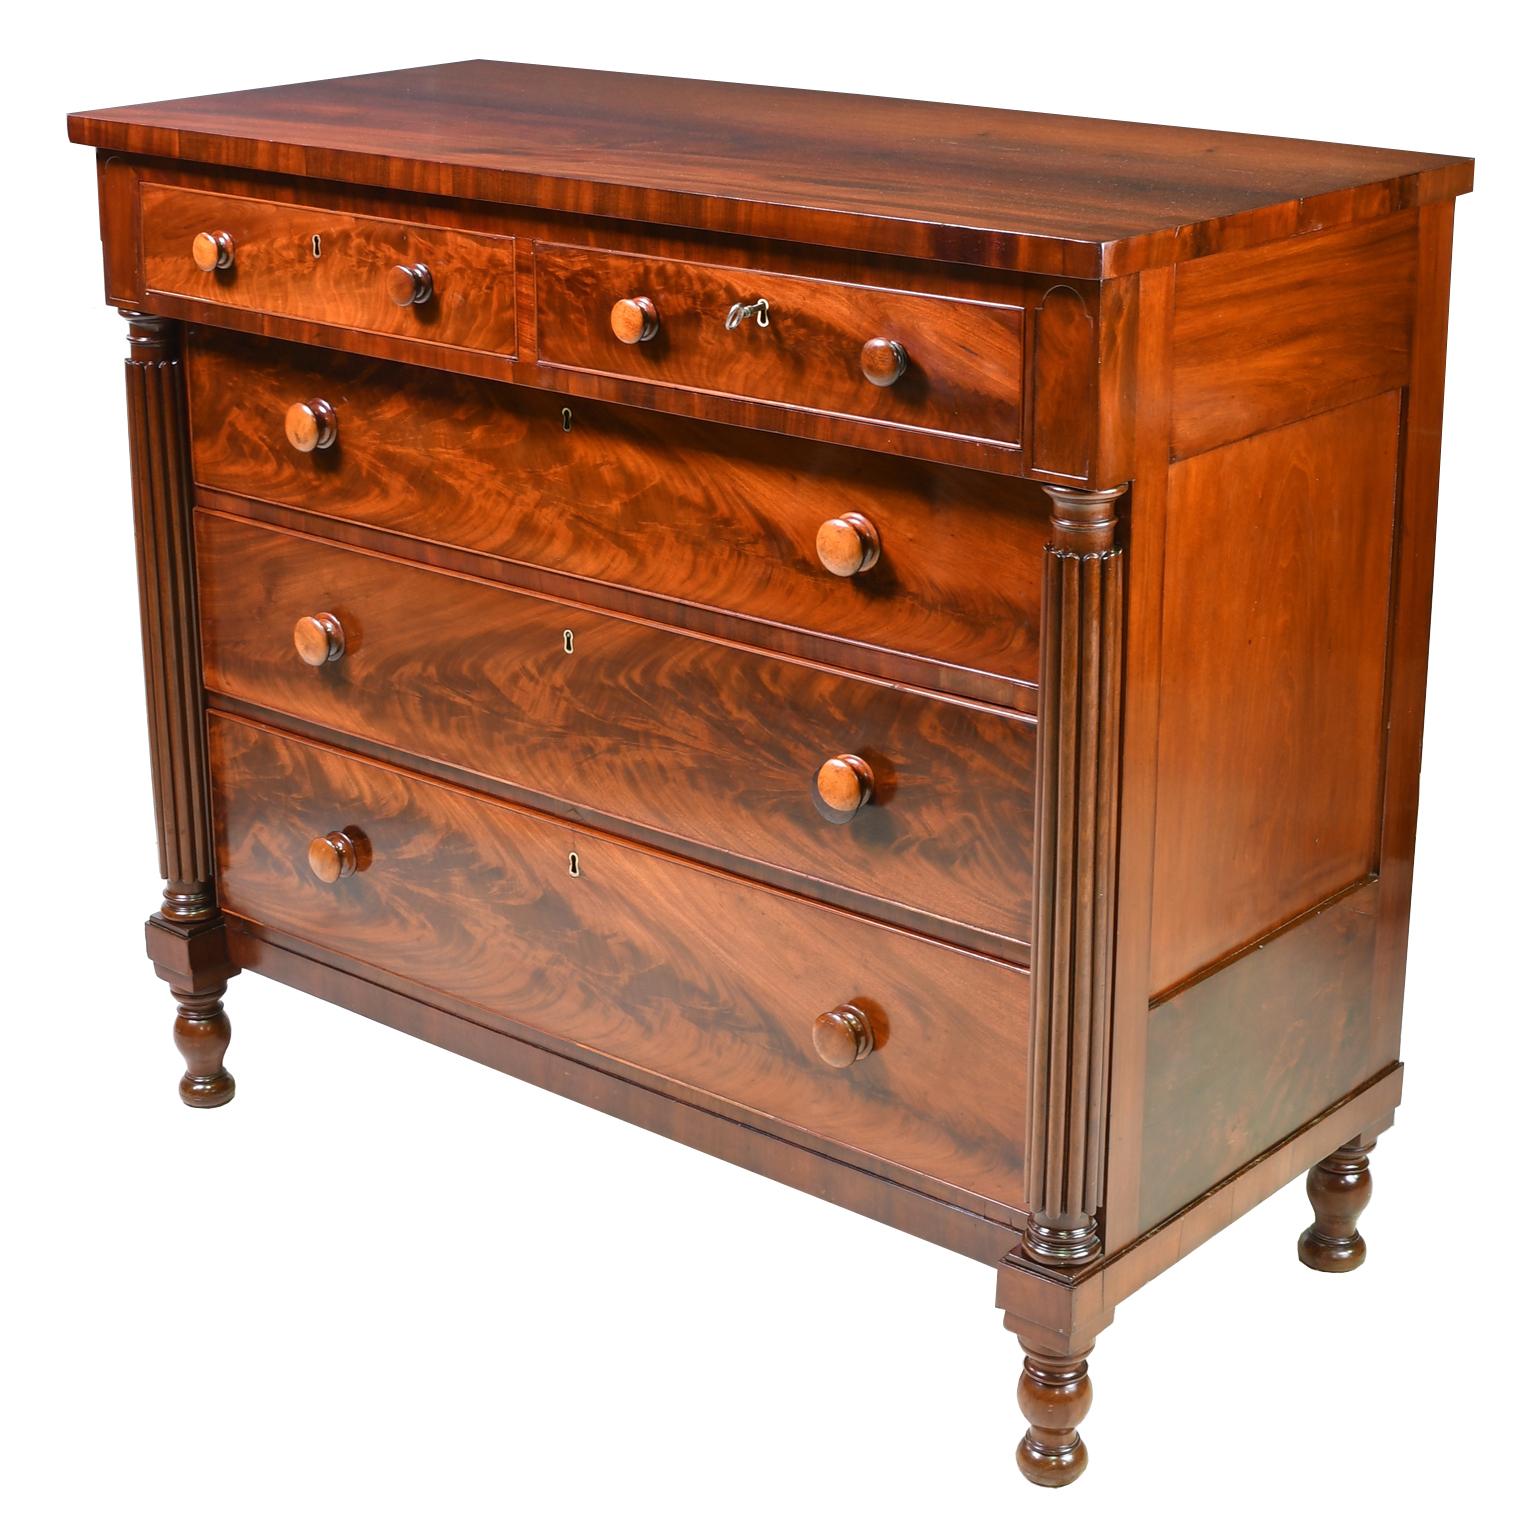 From the Federal period, a very beautiful American Neoclassical chest of drawers in fine West Indies mahogany with two overhanging small drawers supported by turned and reeded columns above three large drawers, all with round wooden pulls. The sides